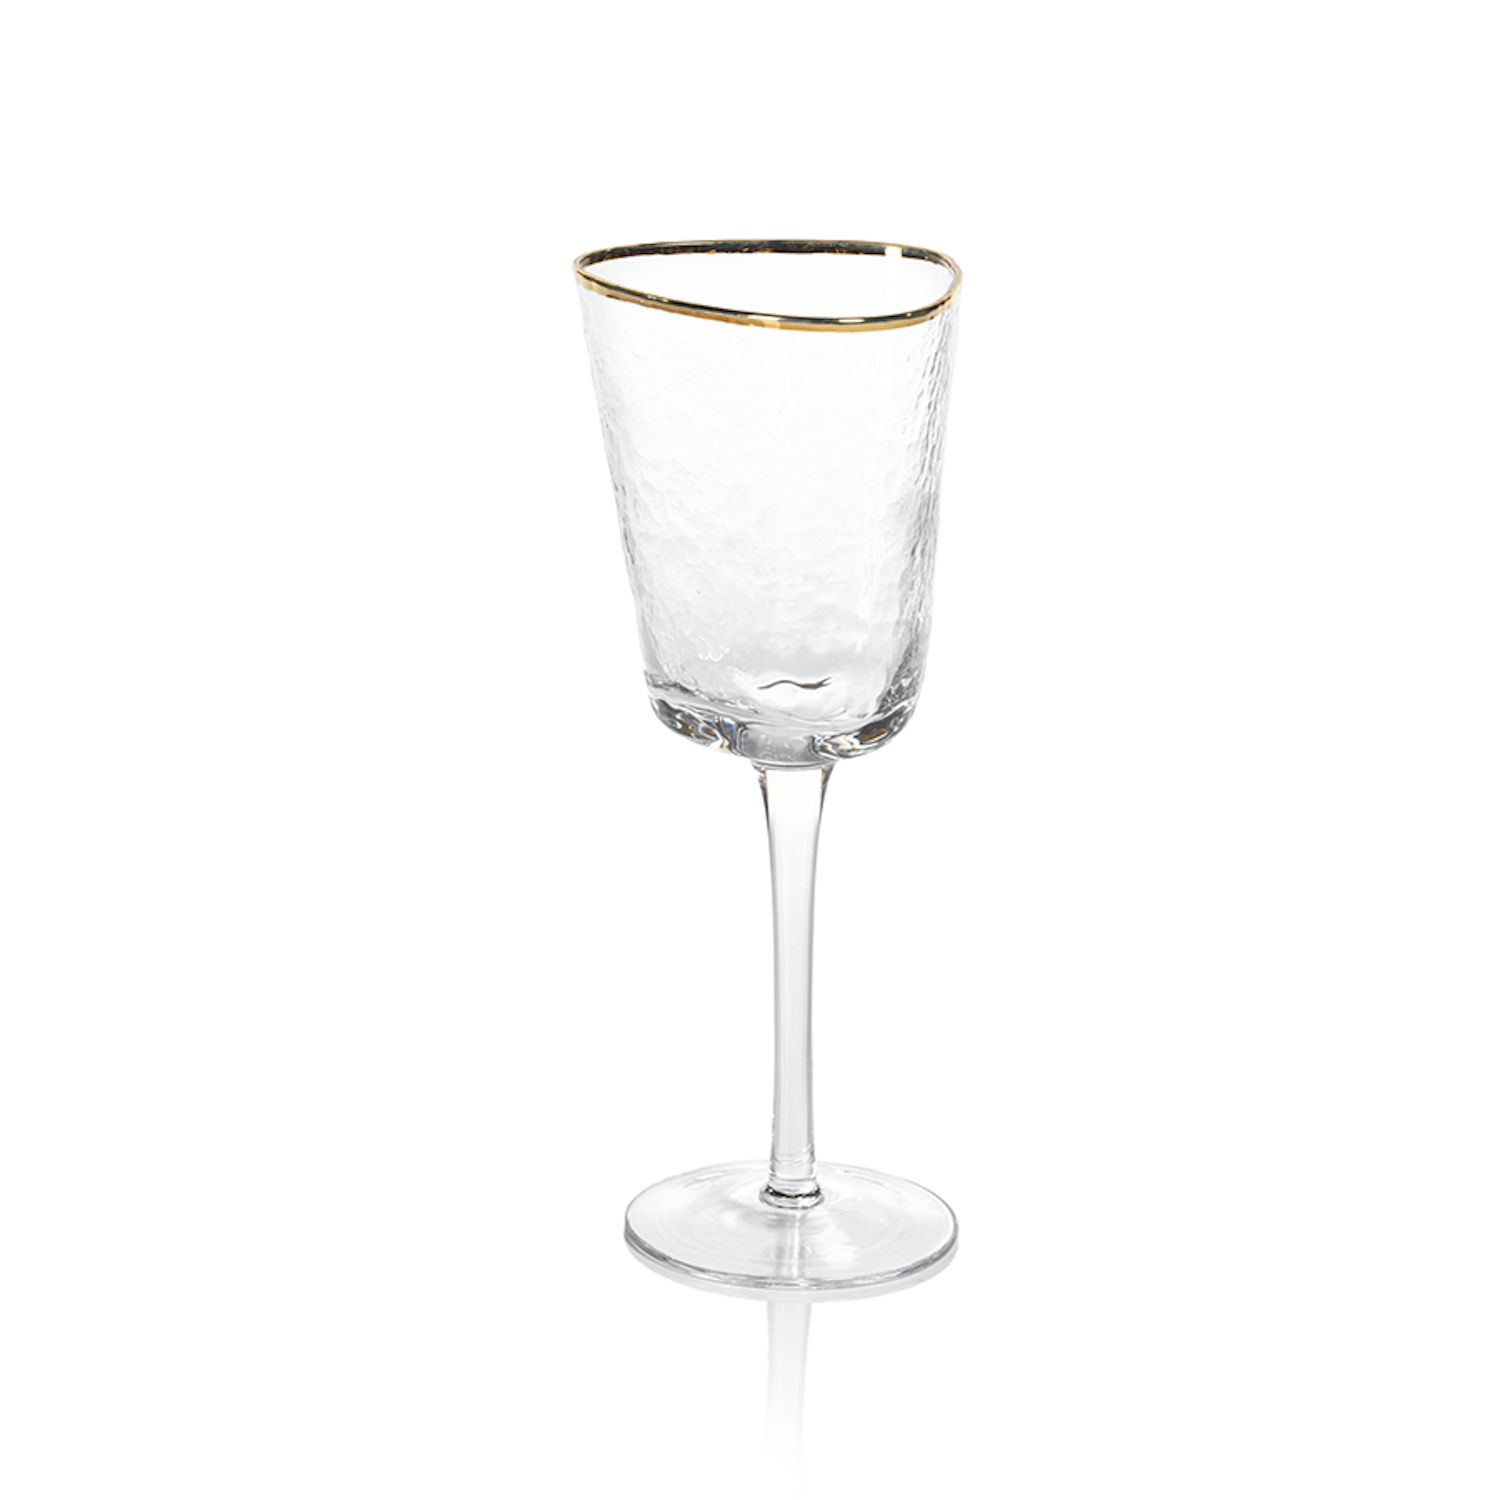 Two Zodax Hammered Glasses with Gold Rim on a tray with a bottle of champagne in the background.